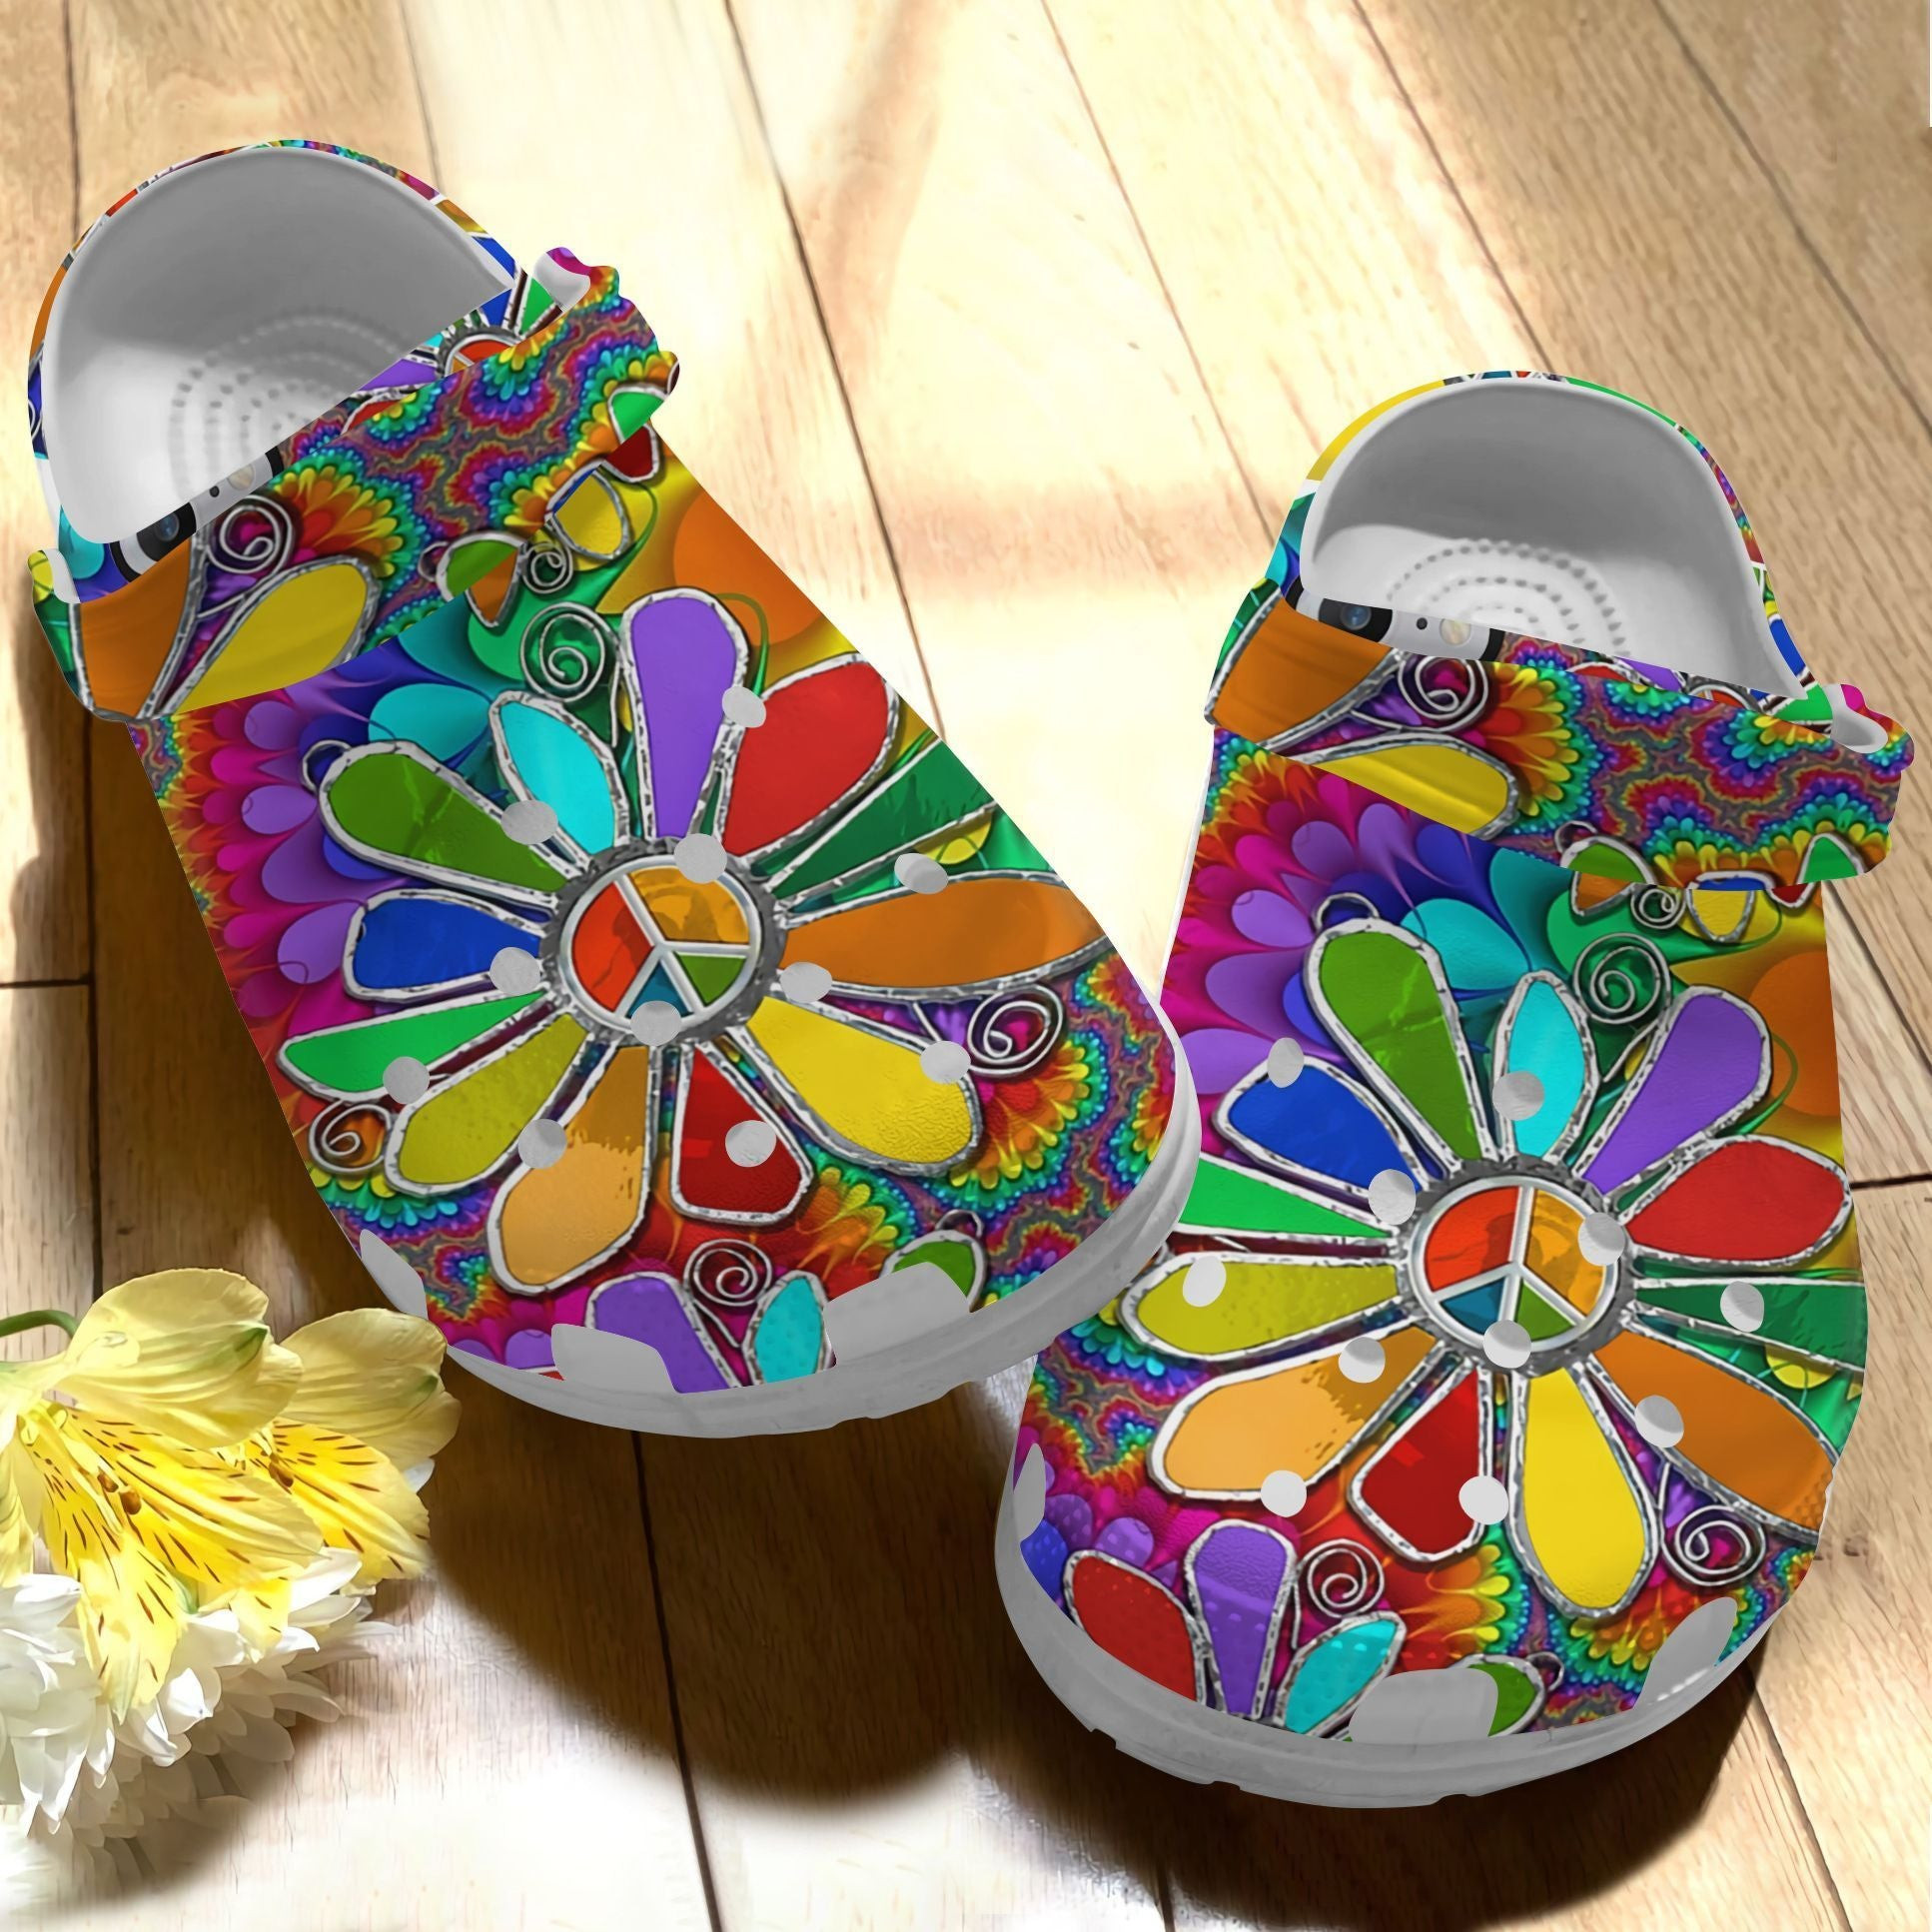 Hippie Flowery Custom Crocs Shoes Clogs Women – Hippie Crocs Shoes Clogs Outdoor Crocs Shoes Clogs Gifts For Niece Daughter